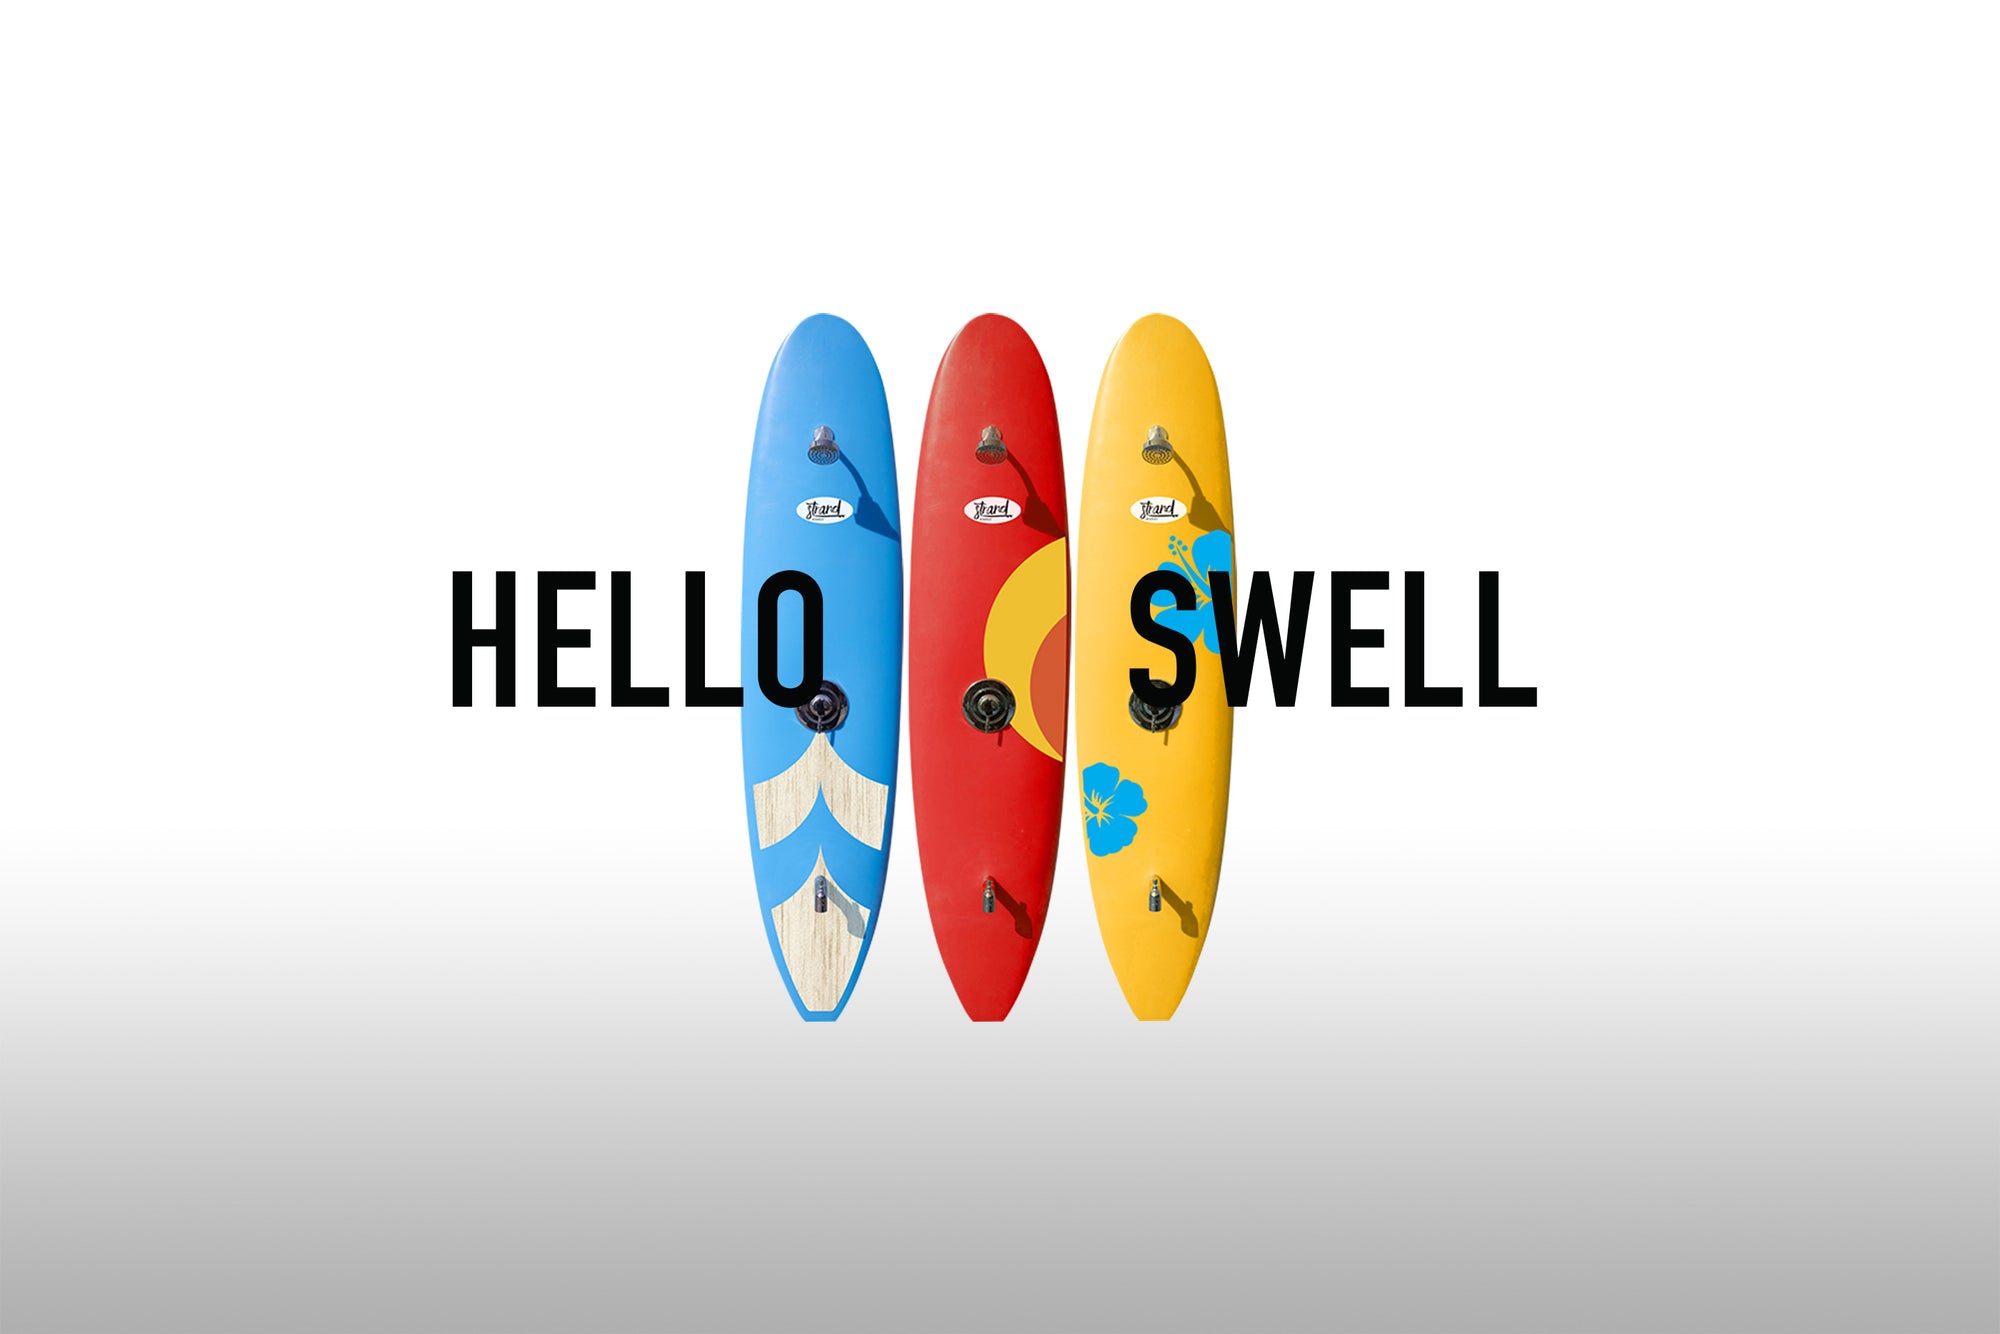 New Product Launch. Meet the New Swell Series by Strand Boards